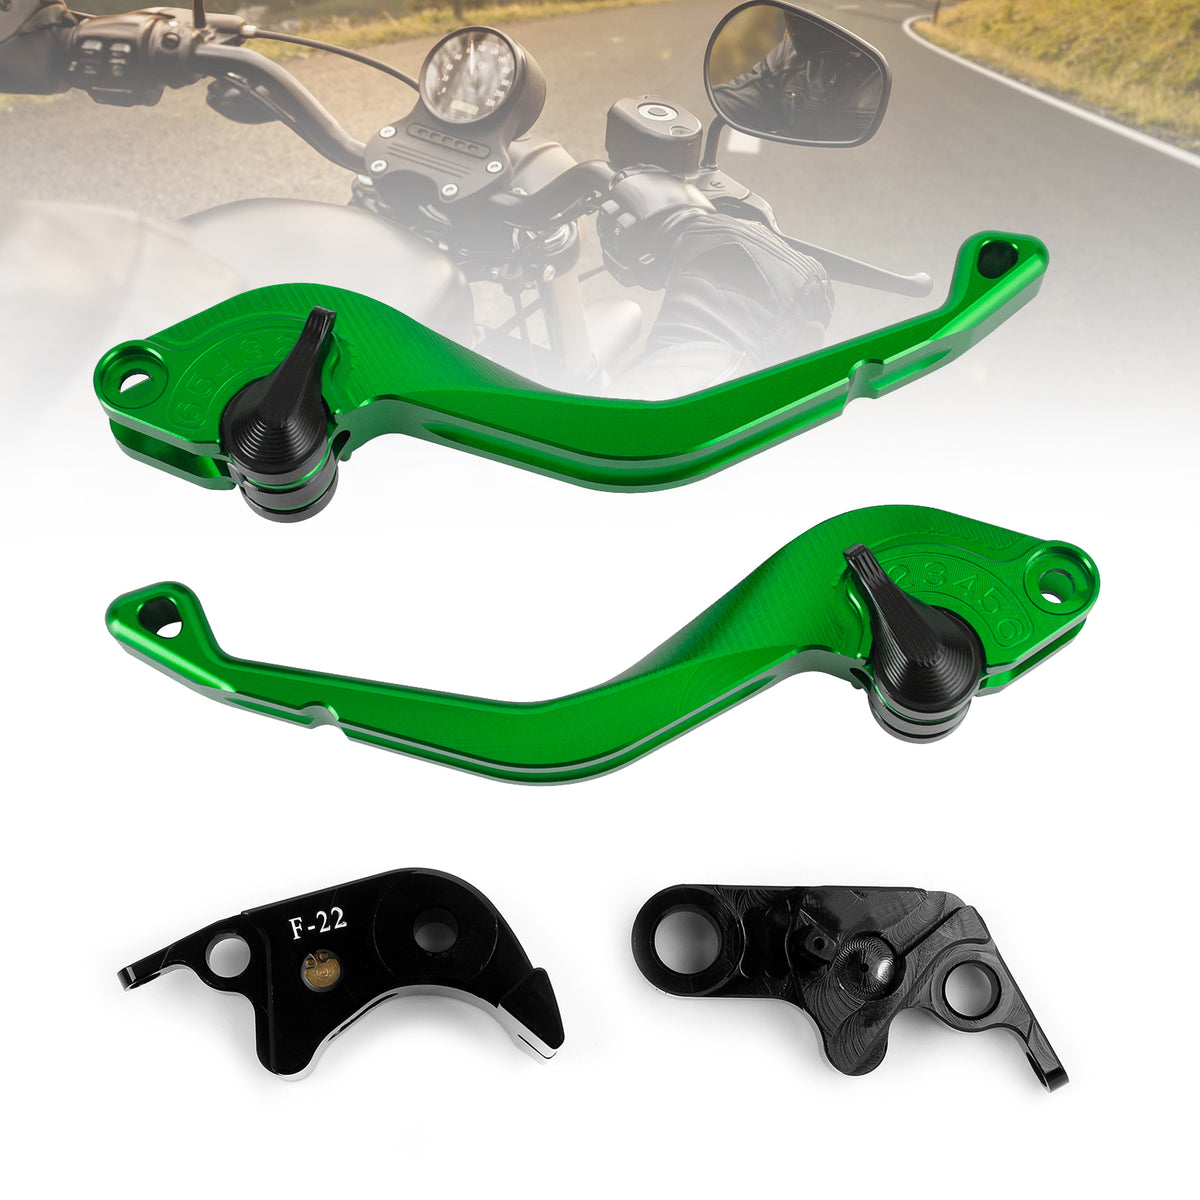 CNC Short Clutch Brake Lever fit for BMW S1000R 2014 S1000RR 2010-2014